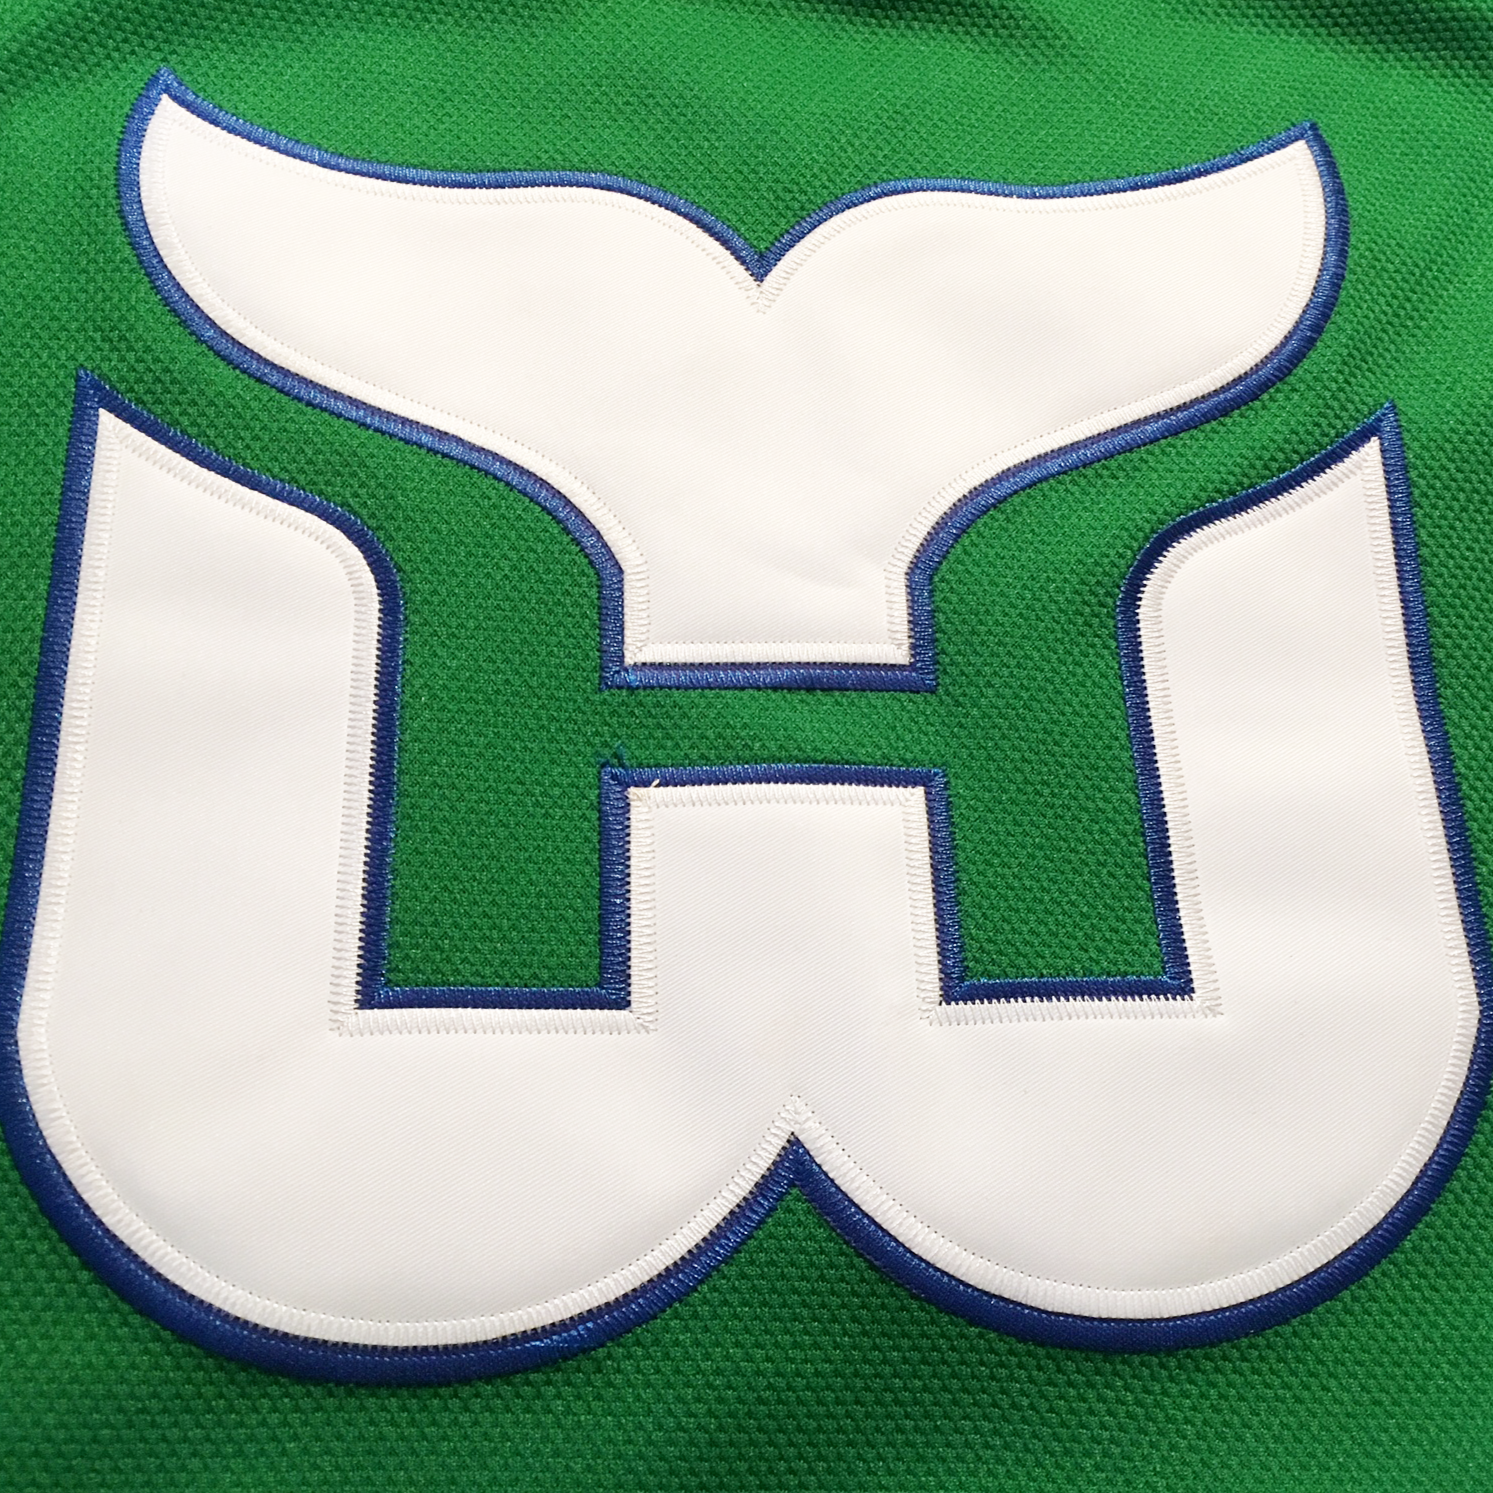 New England Whalers Gifts & Merchandise for Sale